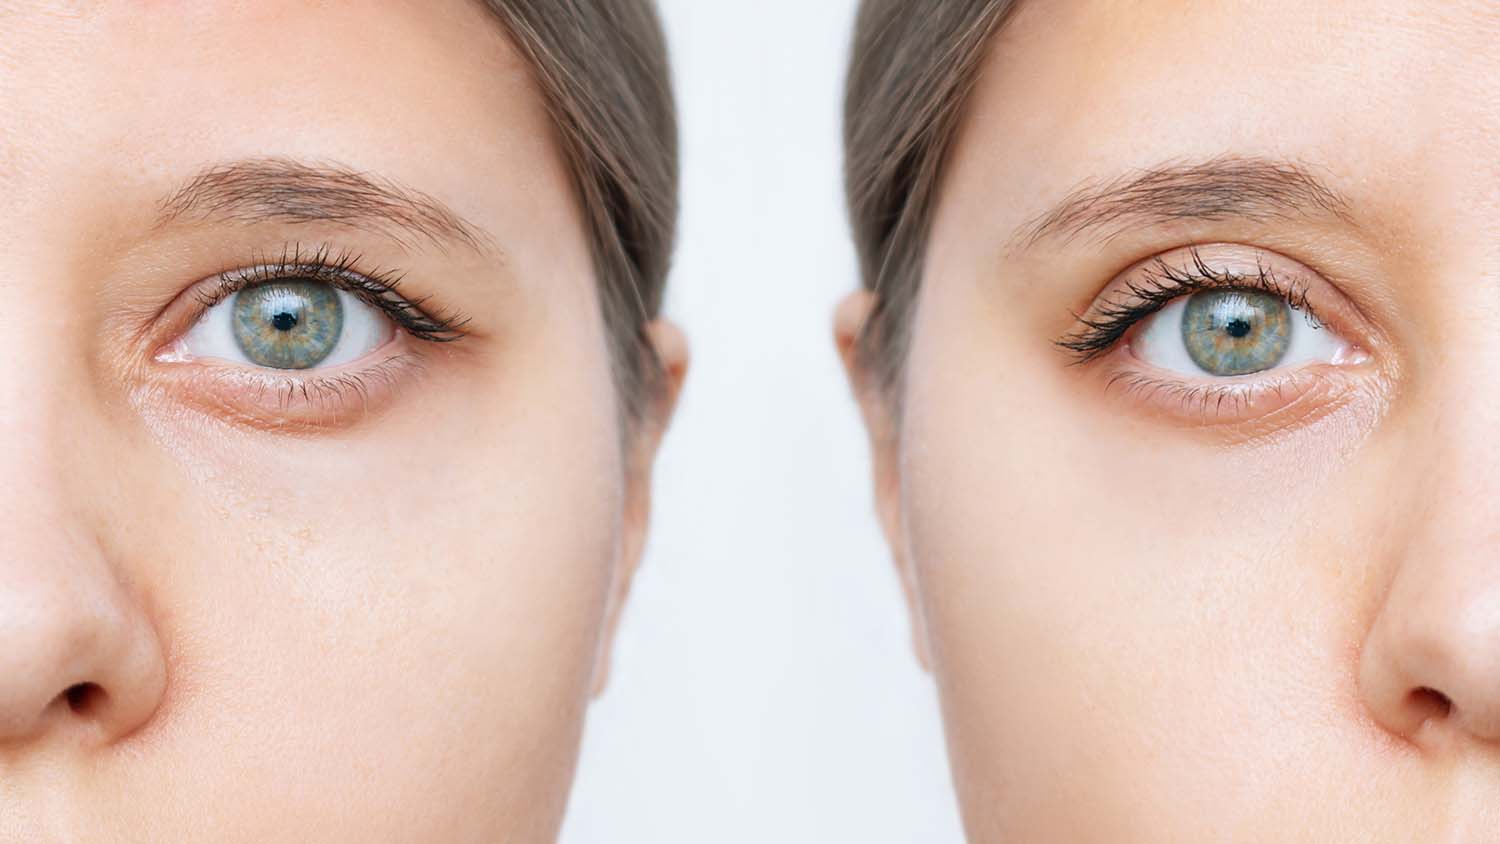 Eyelid Surgery: For Your Eyes Only